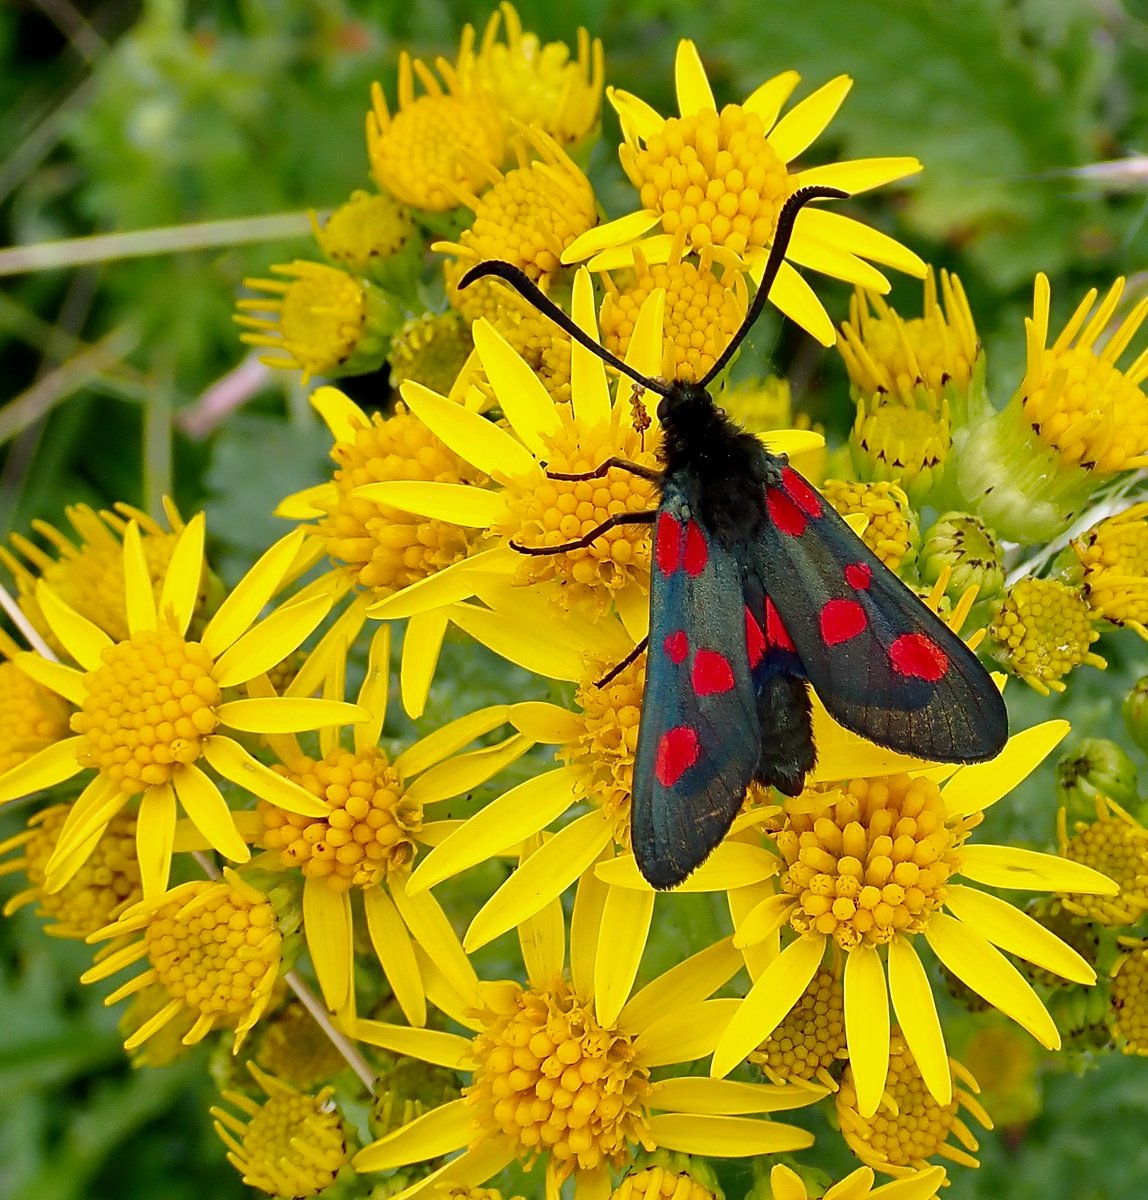 Ragwort is everywhere in the #Northumberland dunes at the moment which means munching cinnabar caterpillars and lounging Five-spot Burnet moths. @NEE_Naturalist 😀